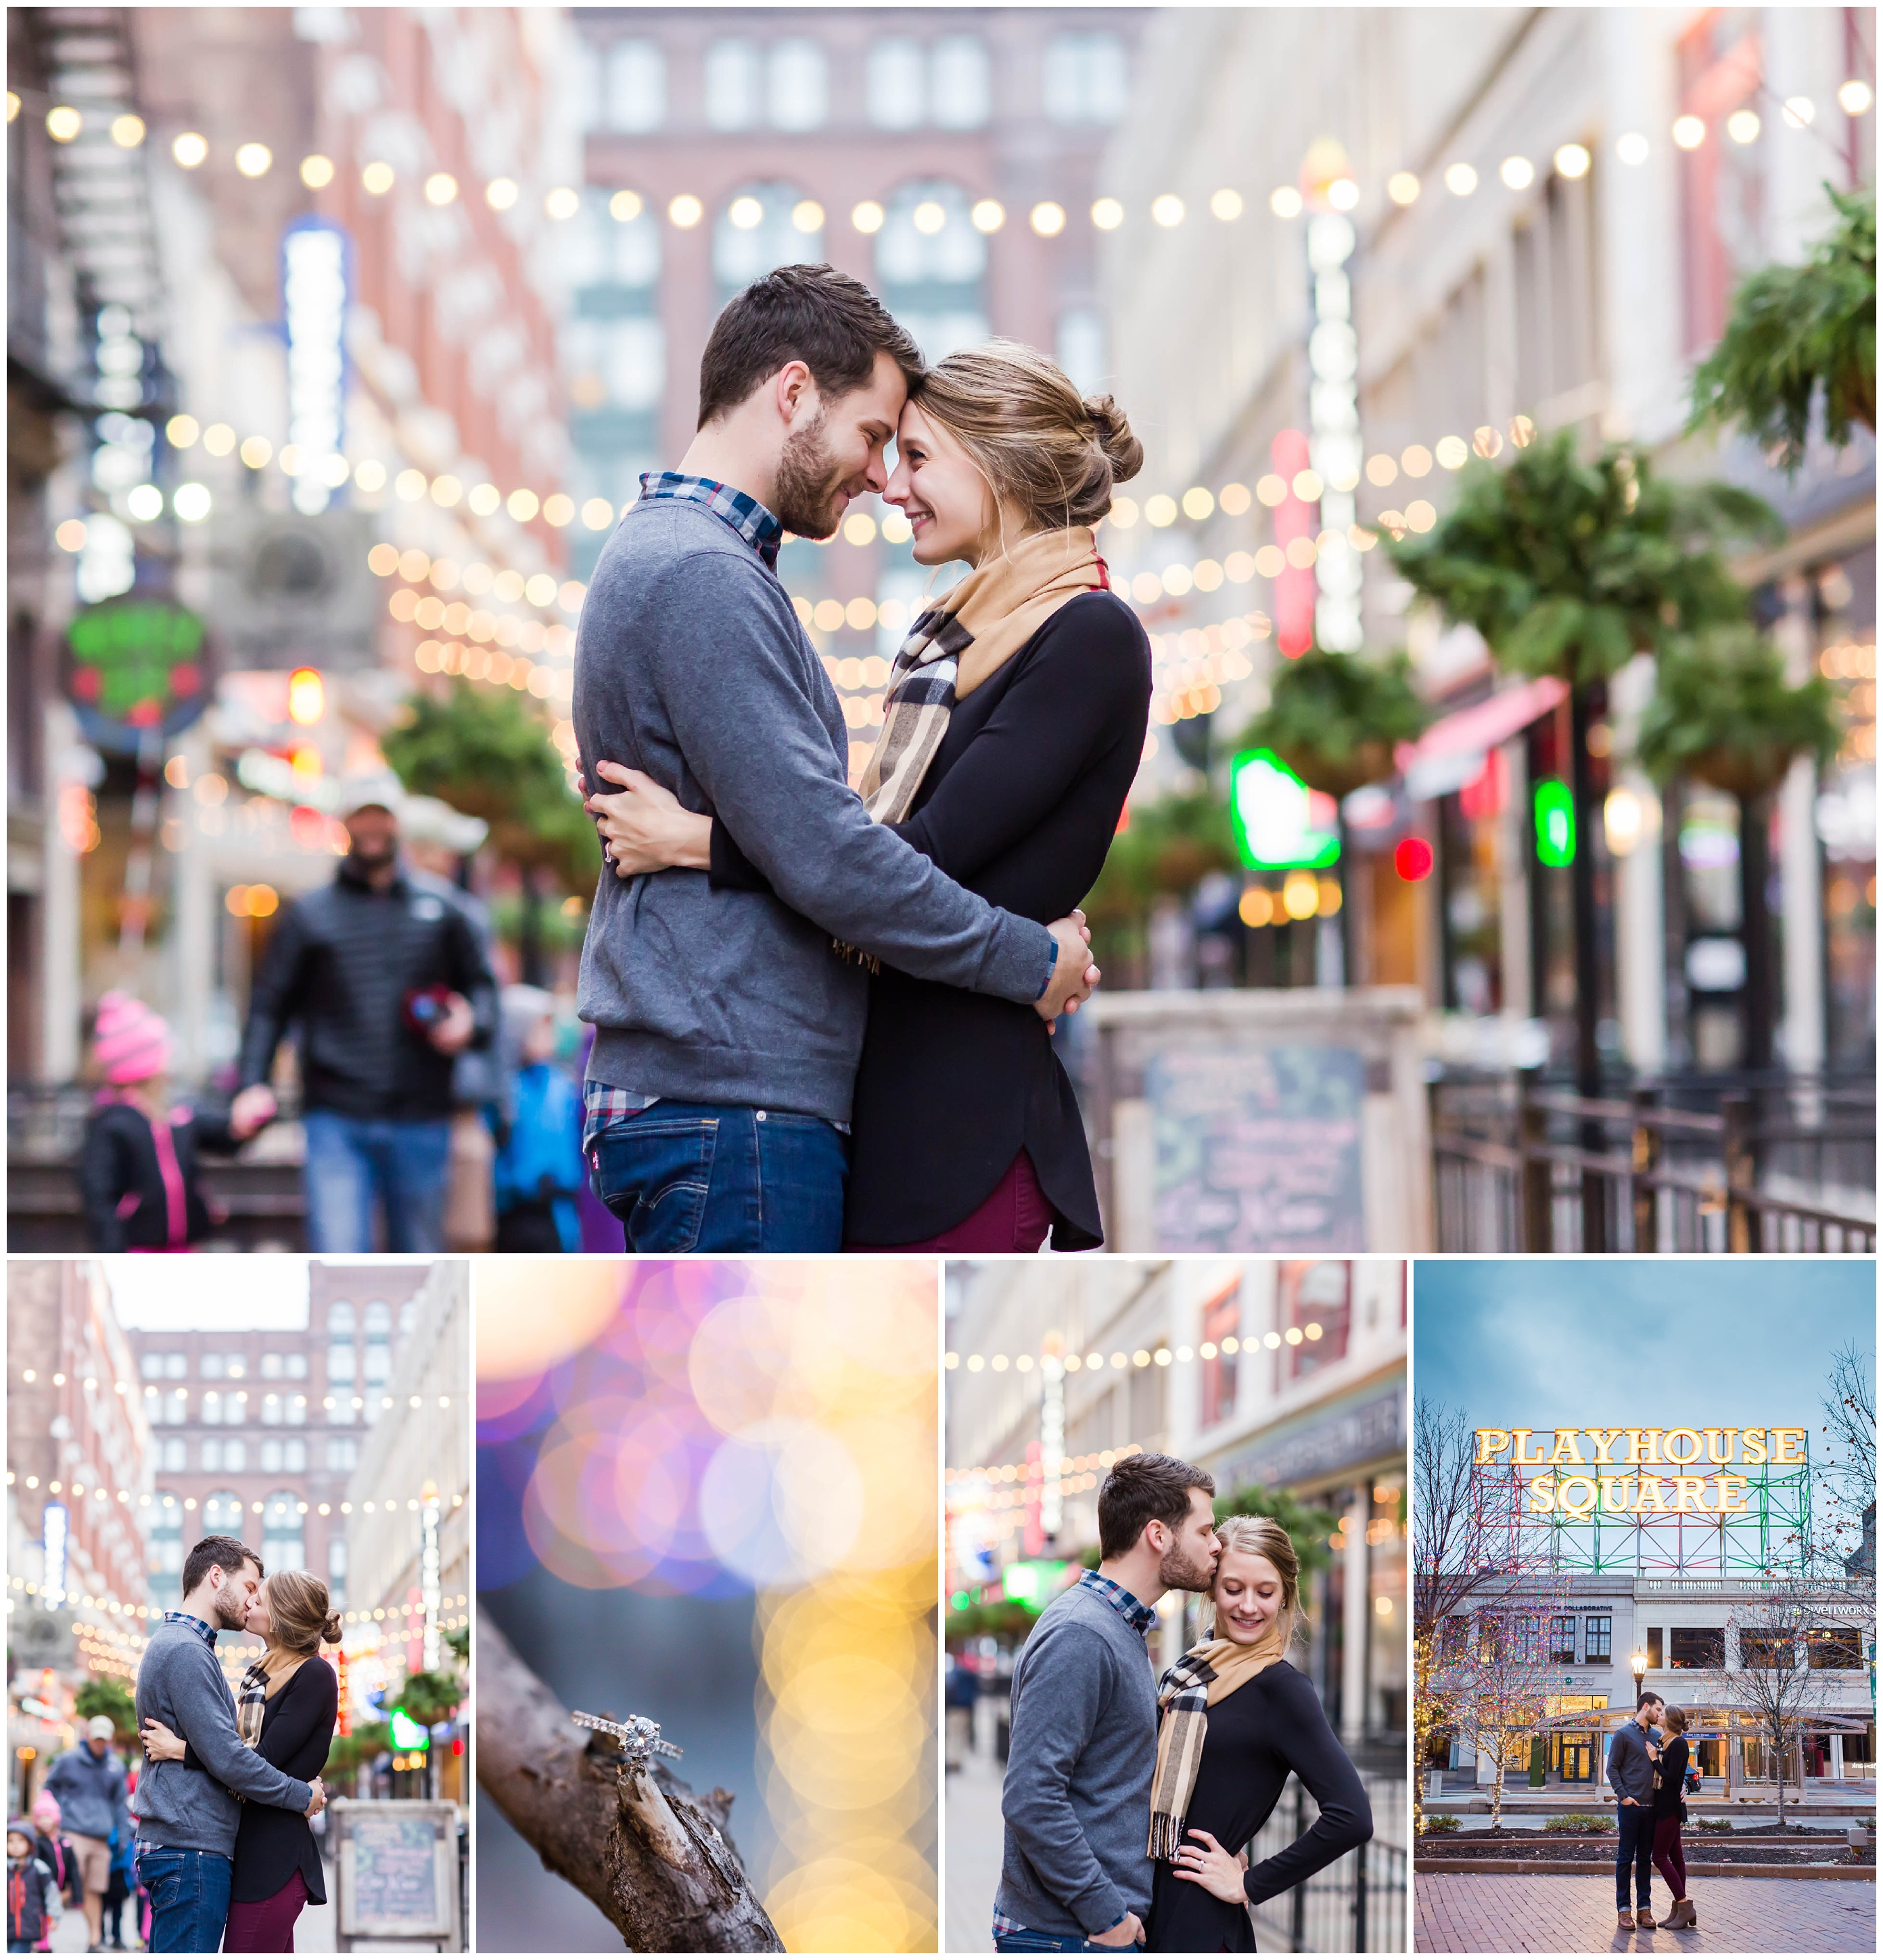 4th Street Arts Districts Cleveland,Cleveland Engagement Session,Playhouse Square,The Arcade Cleveland,loren jackson photography,photographer akron ohio,